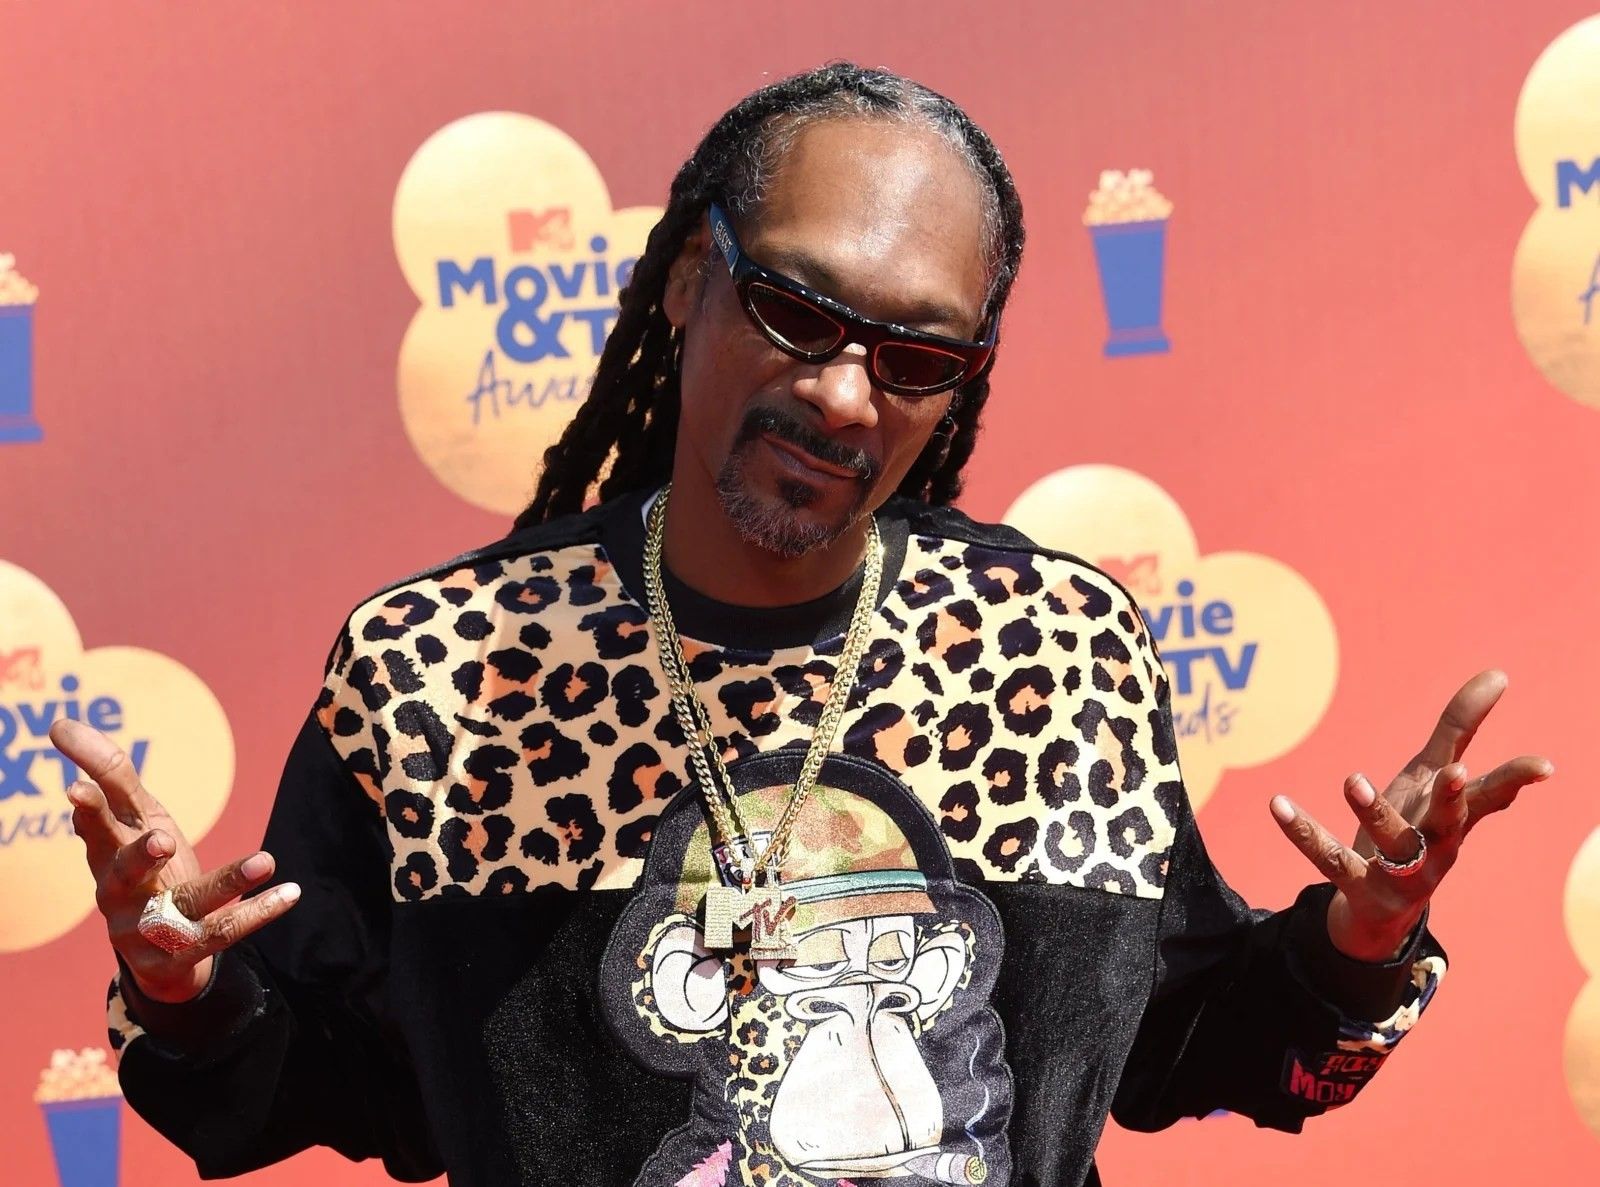 Snoop Dog wearing a leopard shirt with his hands in the air.